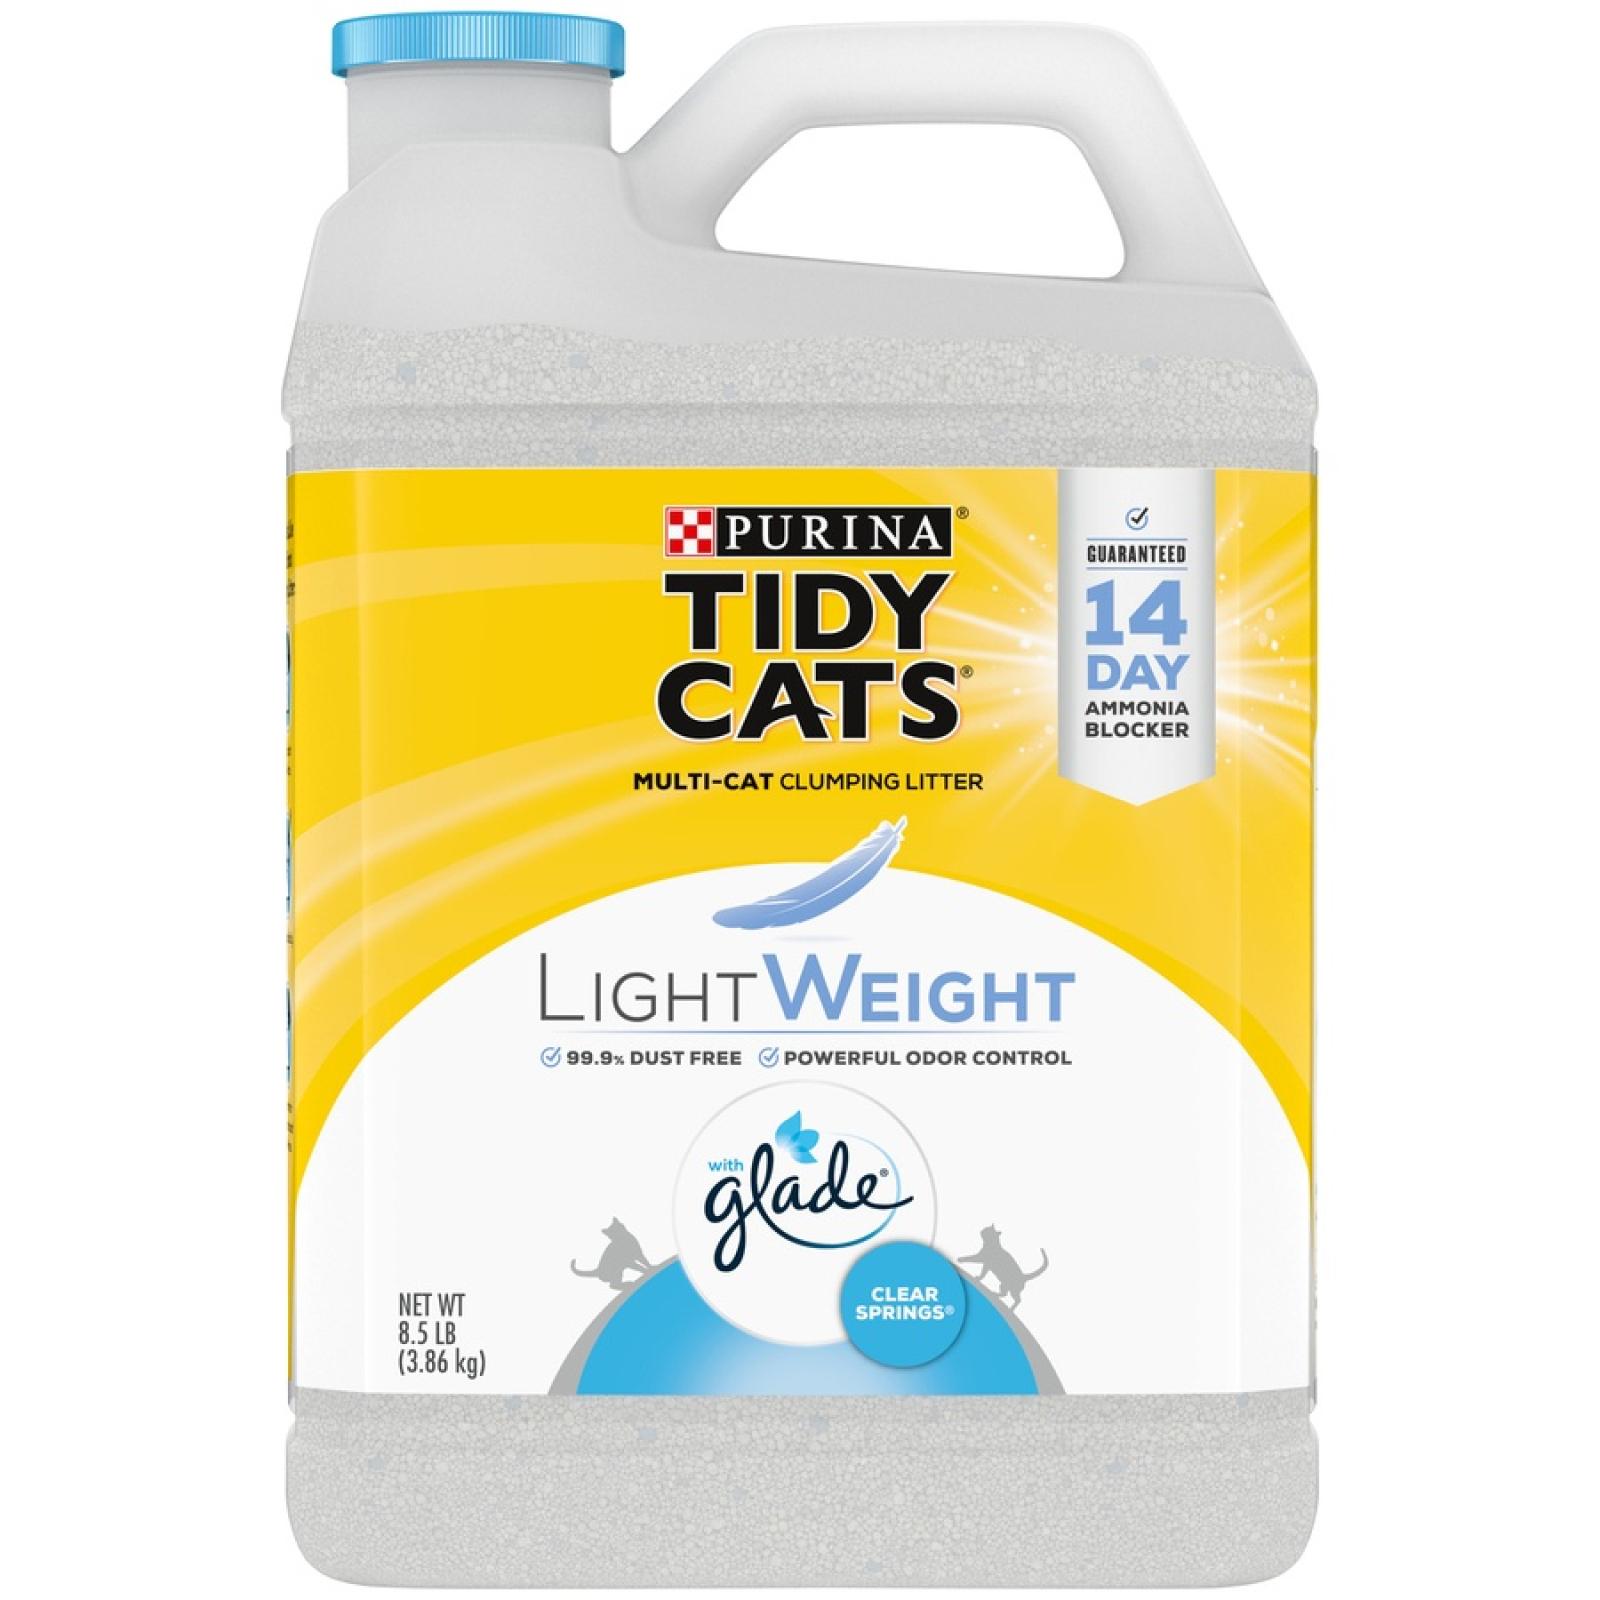 Purina Tidy Cats Lightweight Multi-Cat Clumping Litter with Glade